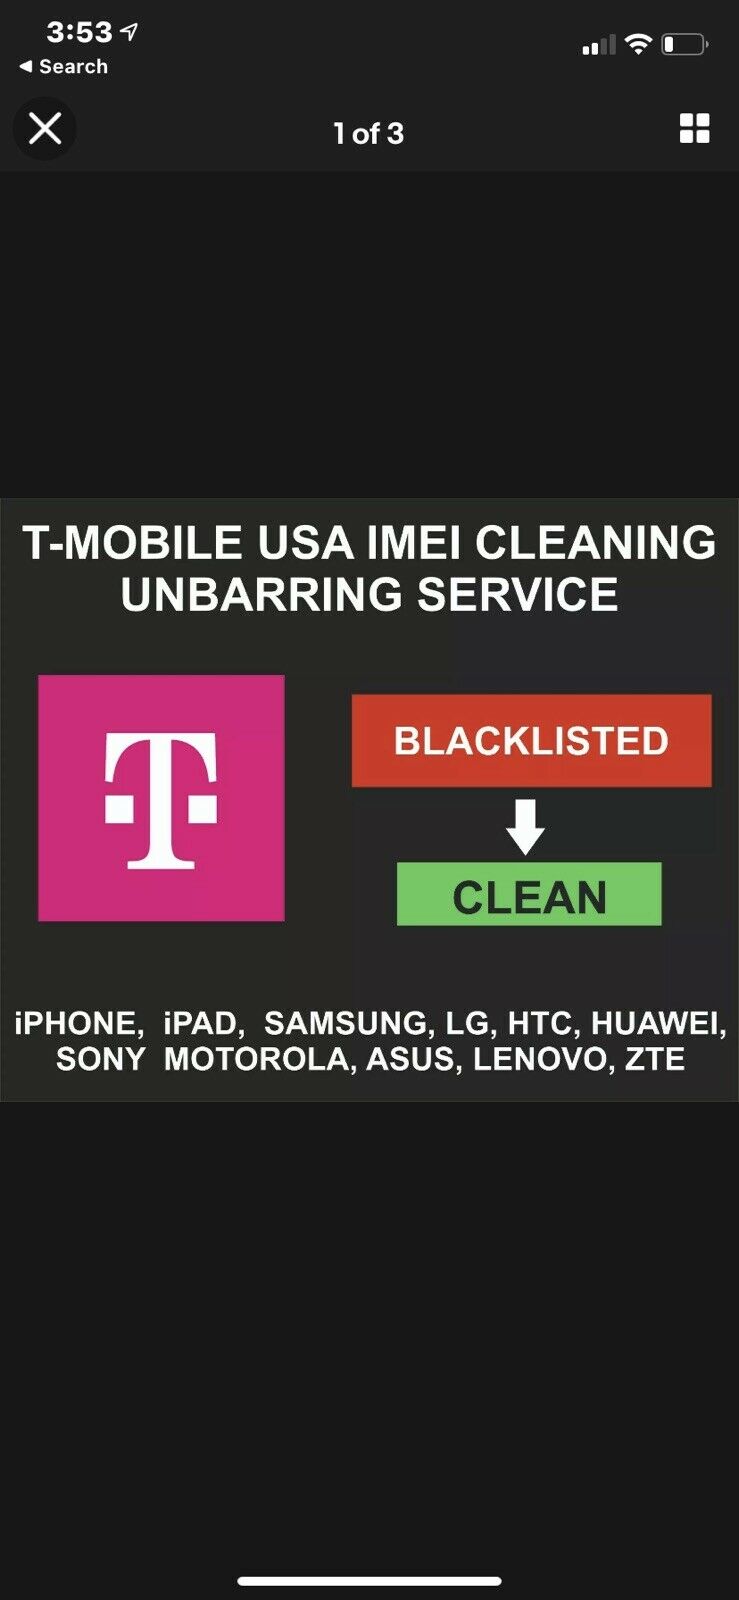 T-mobile Usa Unbarring, Cleaning Service, Iphone, Samsung, Lg, Alcatel, Sony